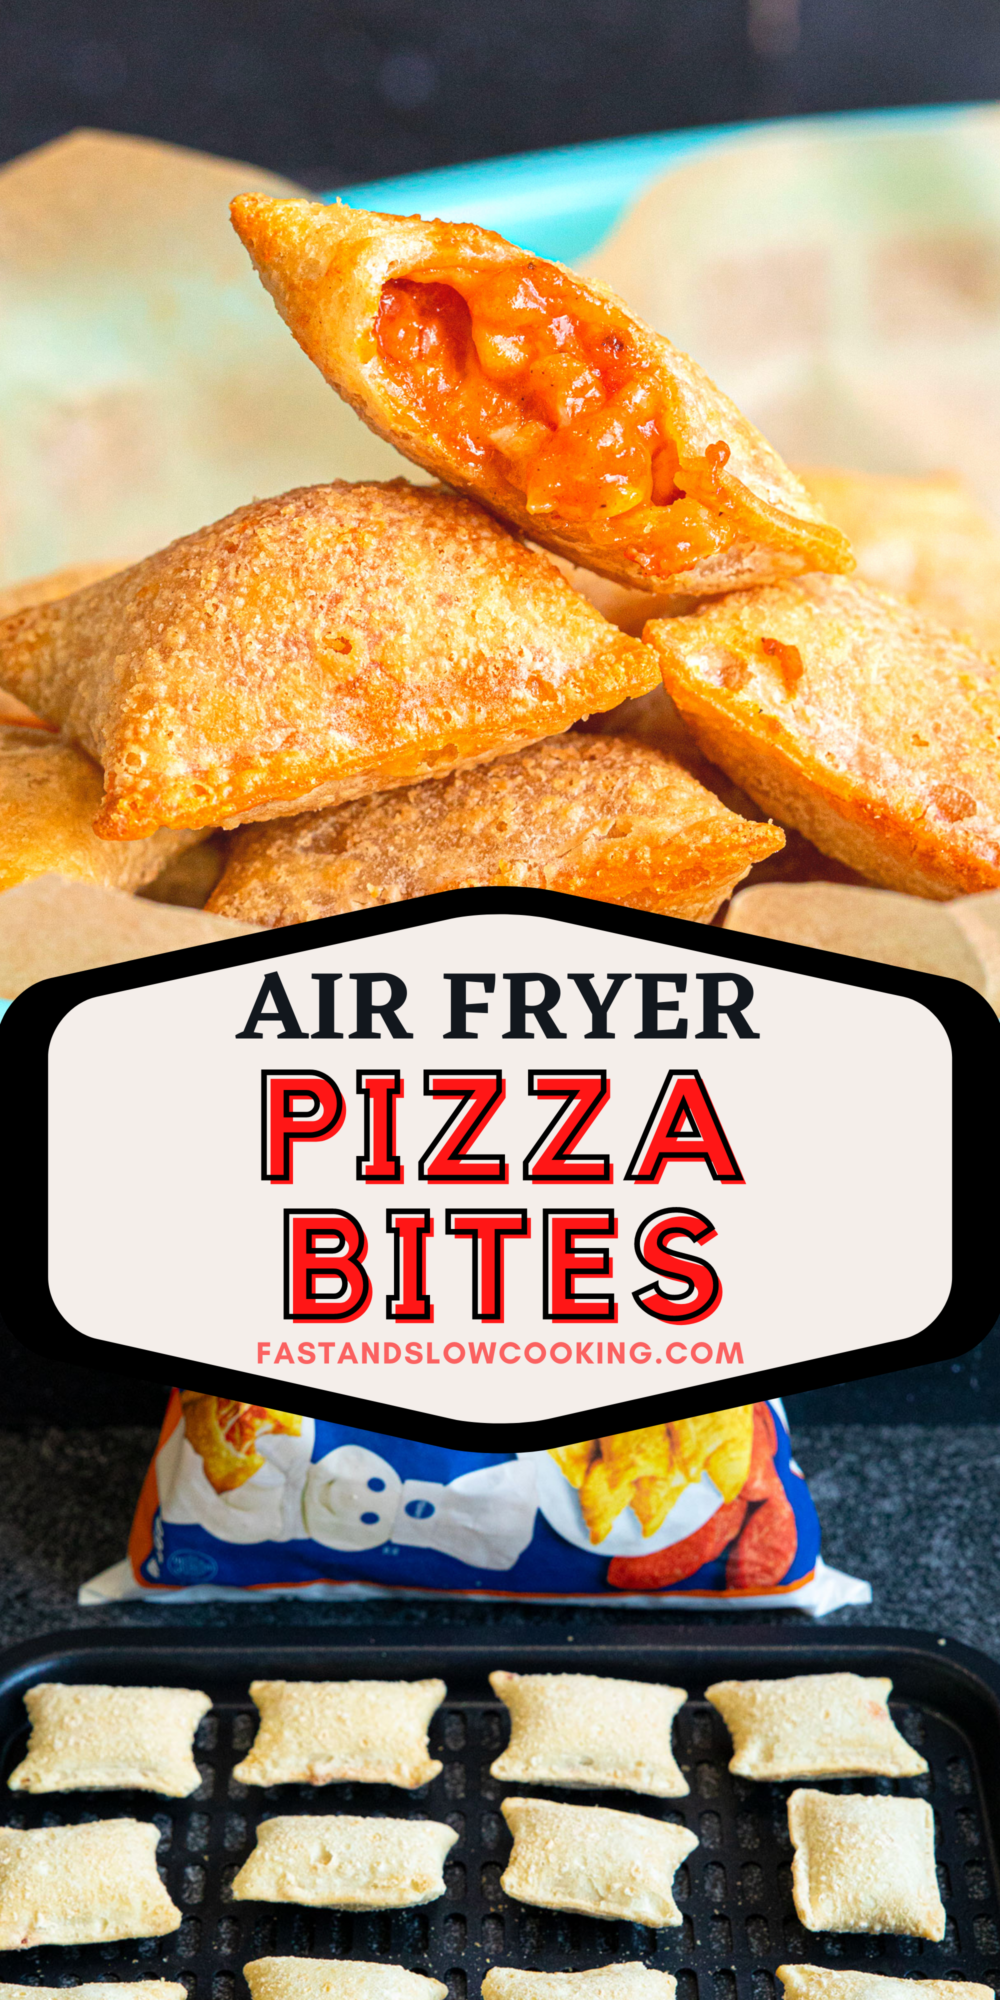 Crispy on the outside and filled with hot, cheesy pepperoni deliciousness, these pizza bites in the air fryer are the best way to make them - and it only takes 6 minutes!